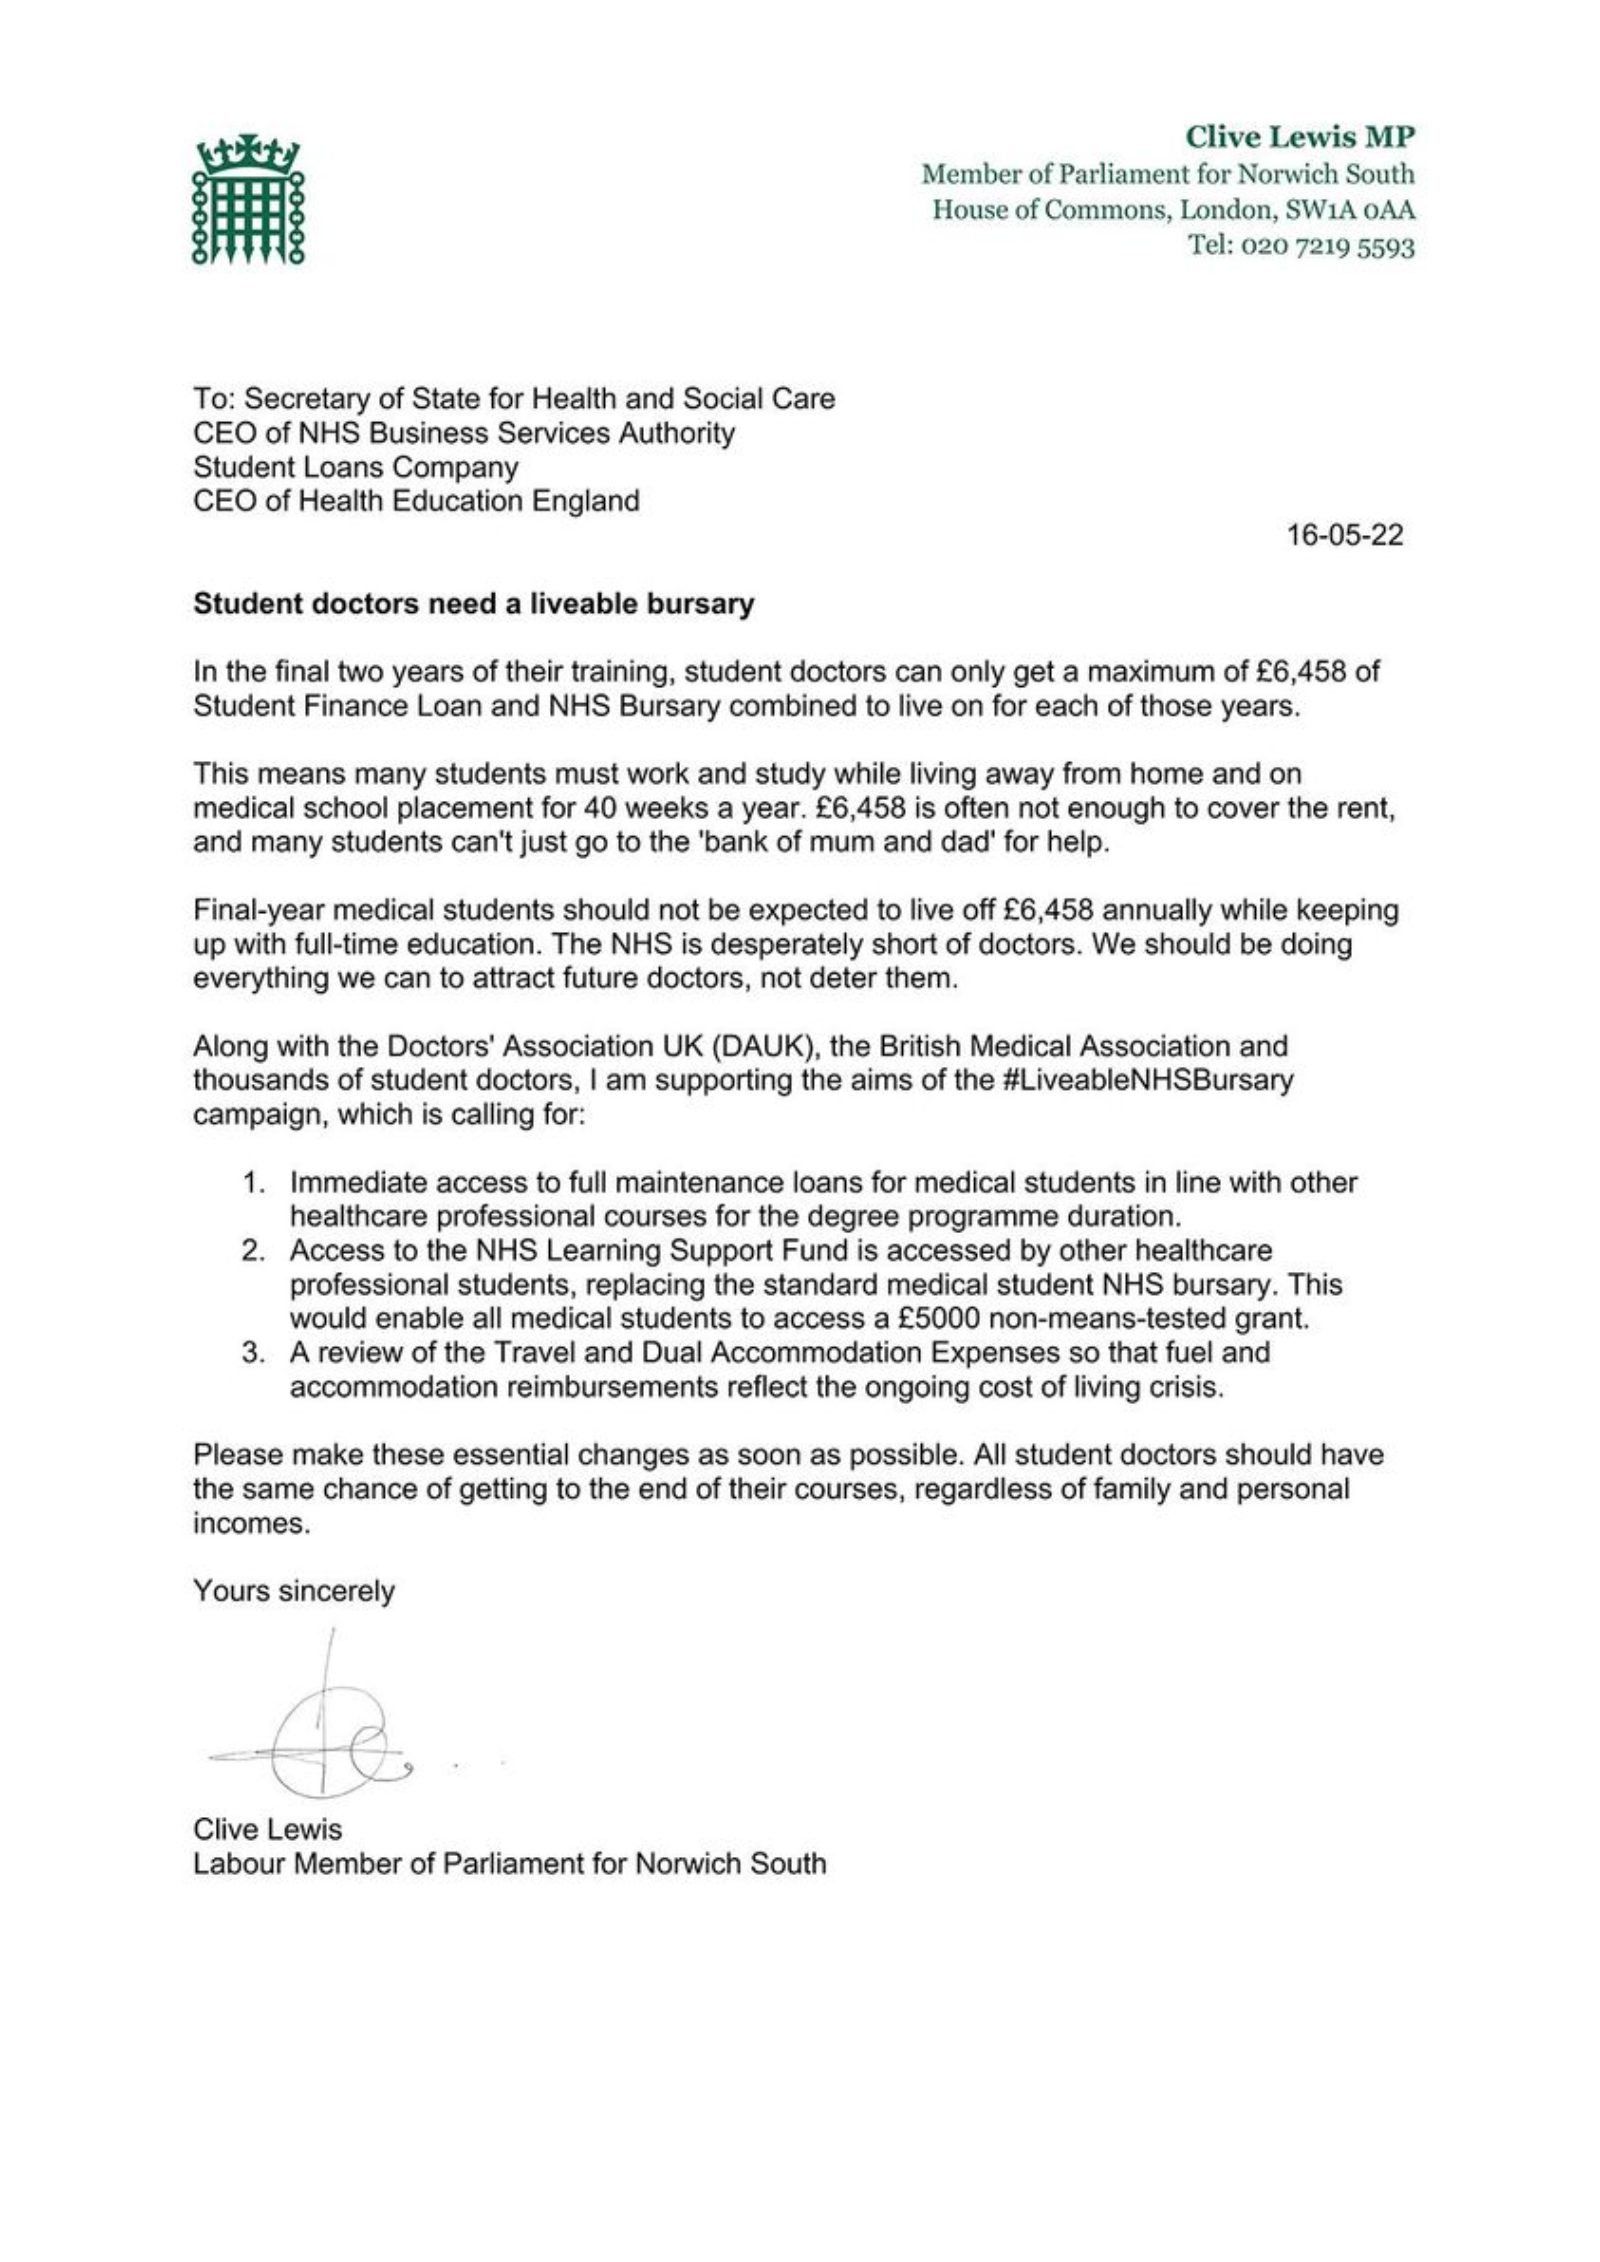 Letter calling for the introduction of a liveable NHS bursary